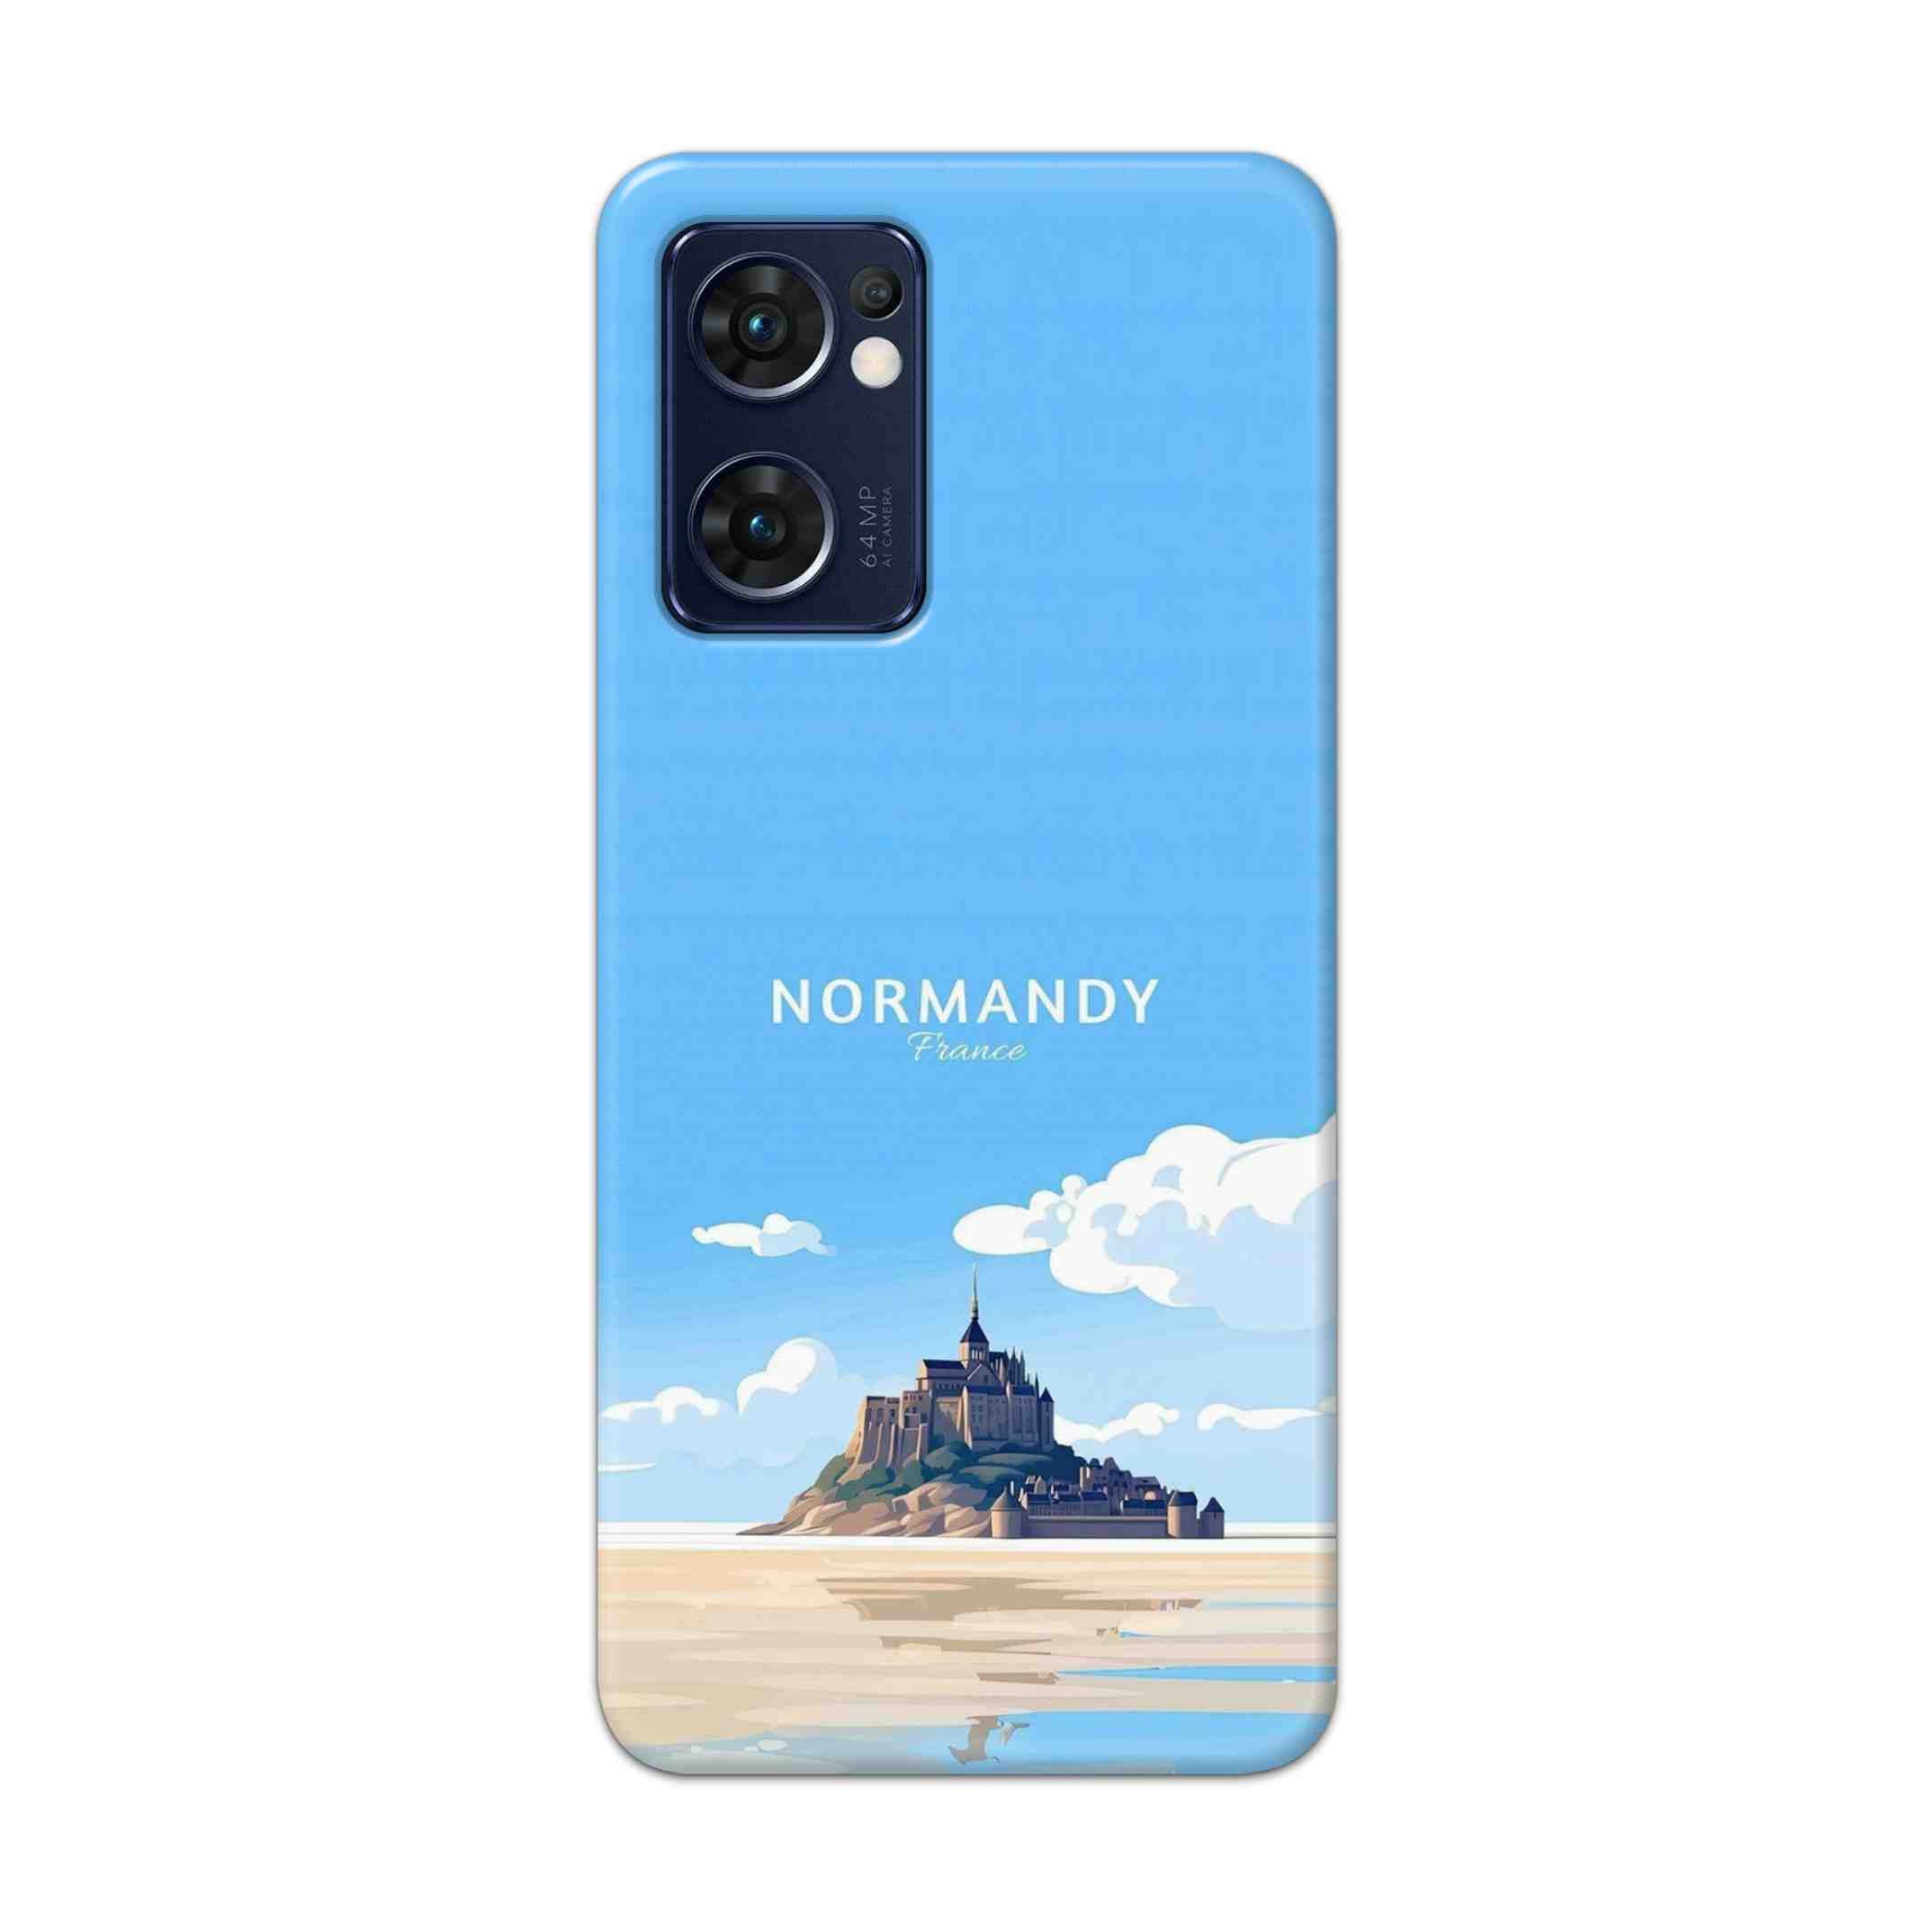 Buy Normandy Hard Back Mobile Phone Case Cover For Reno 7 5G Online